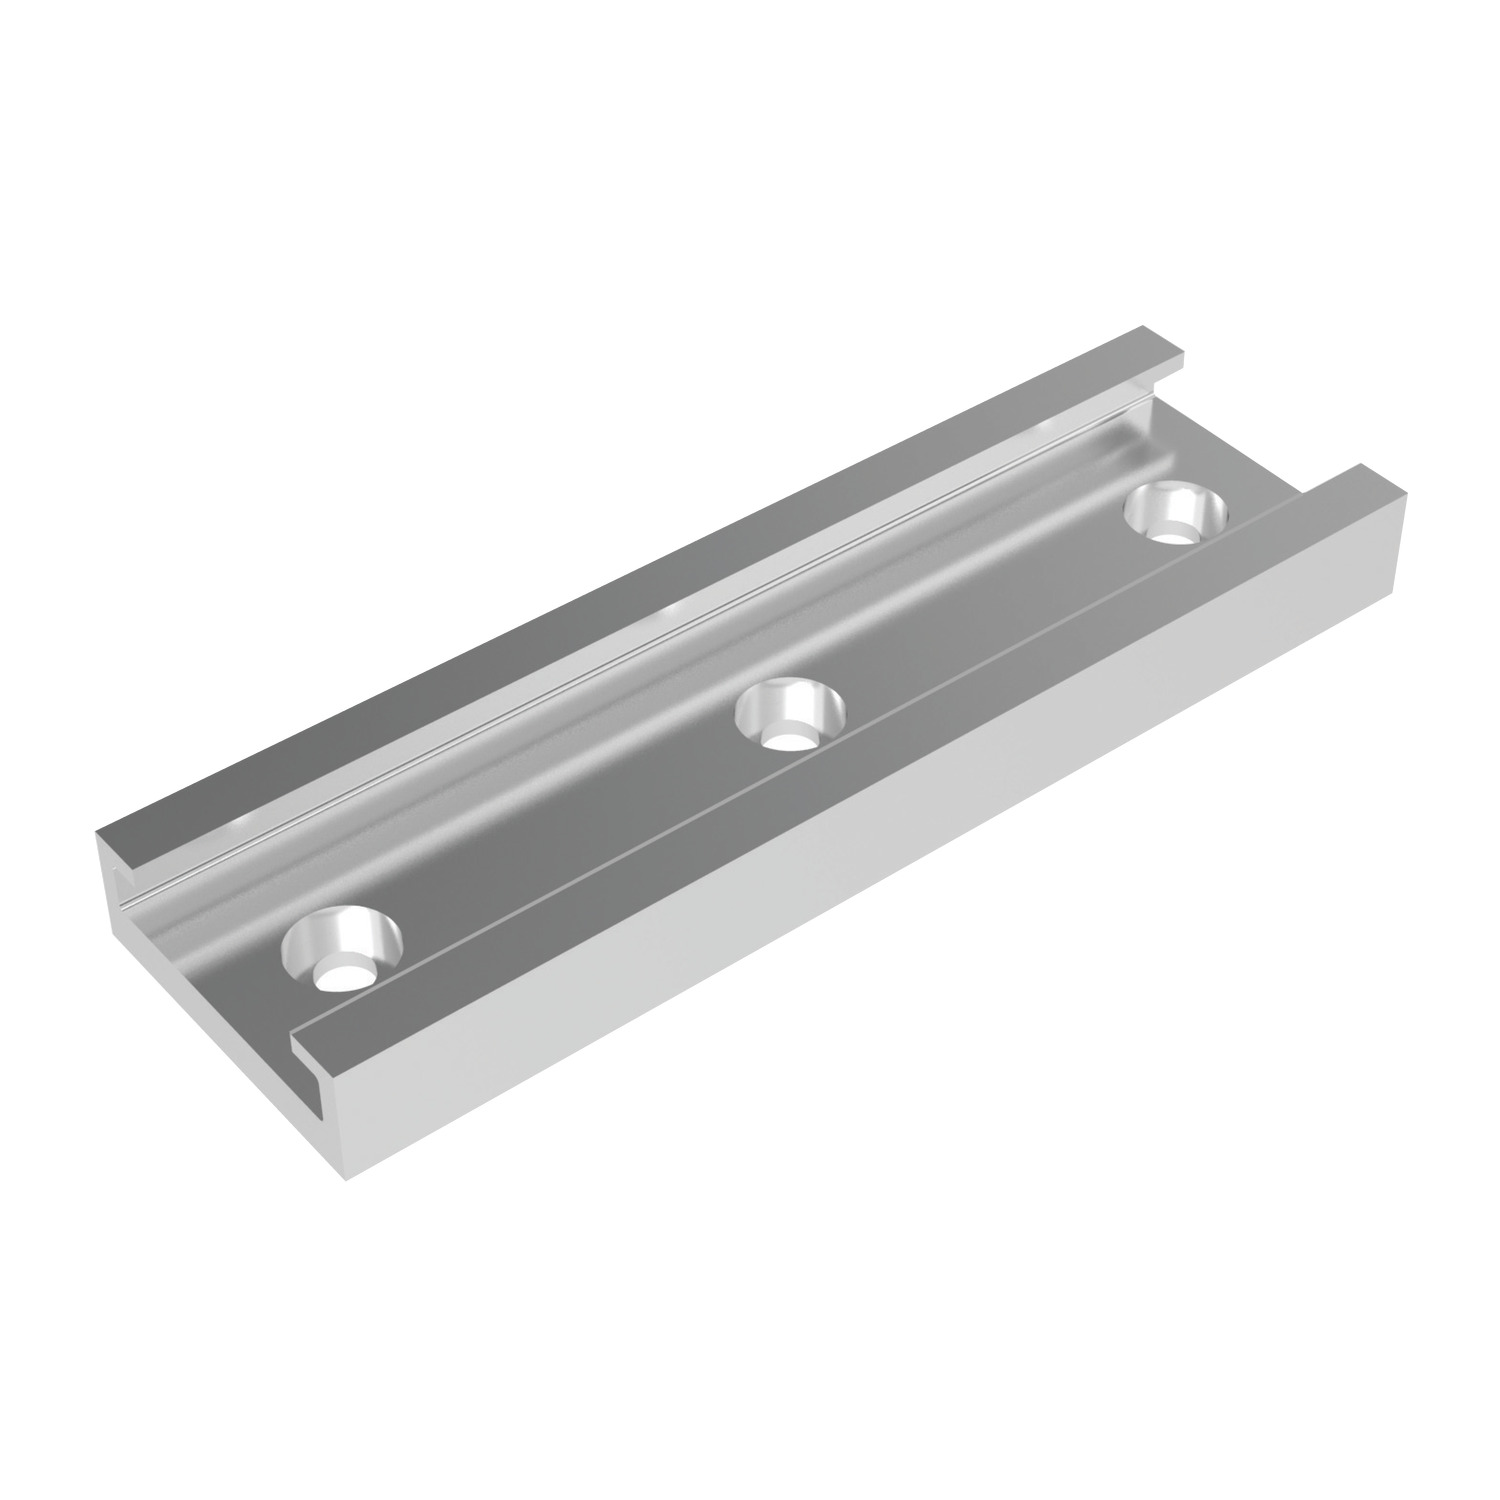 Product P0350, Mini Slide Rail for use with mini slide carriage P0300 / 